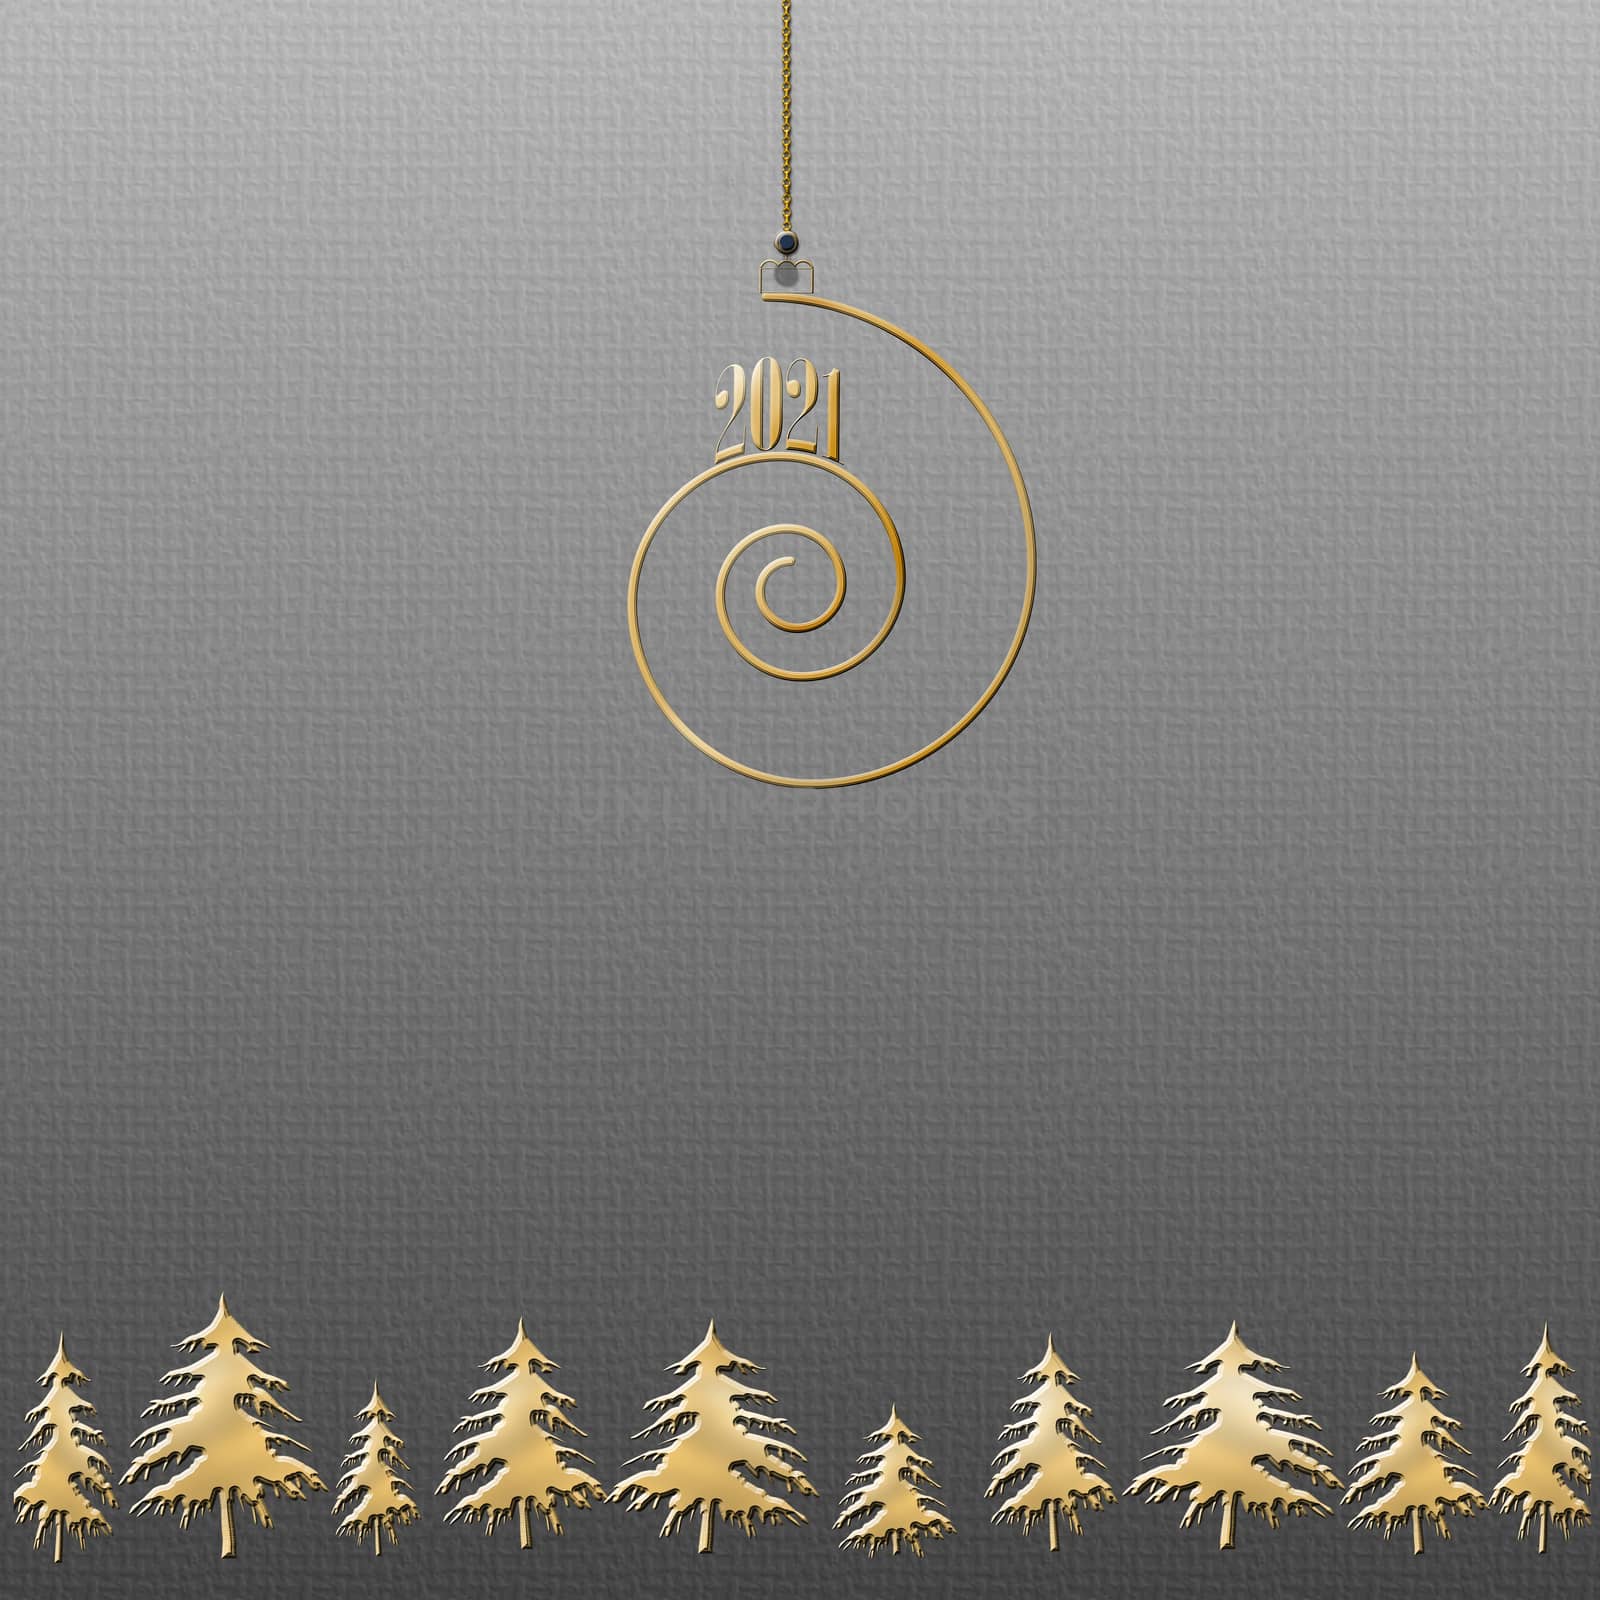 Luxury Happy new year 2021 gold card. Design for banner, greeting cards, brochure or print. Black background with gold Christmas trees and spiral with 2021. Copy space, mock up, banner. 3D illustration